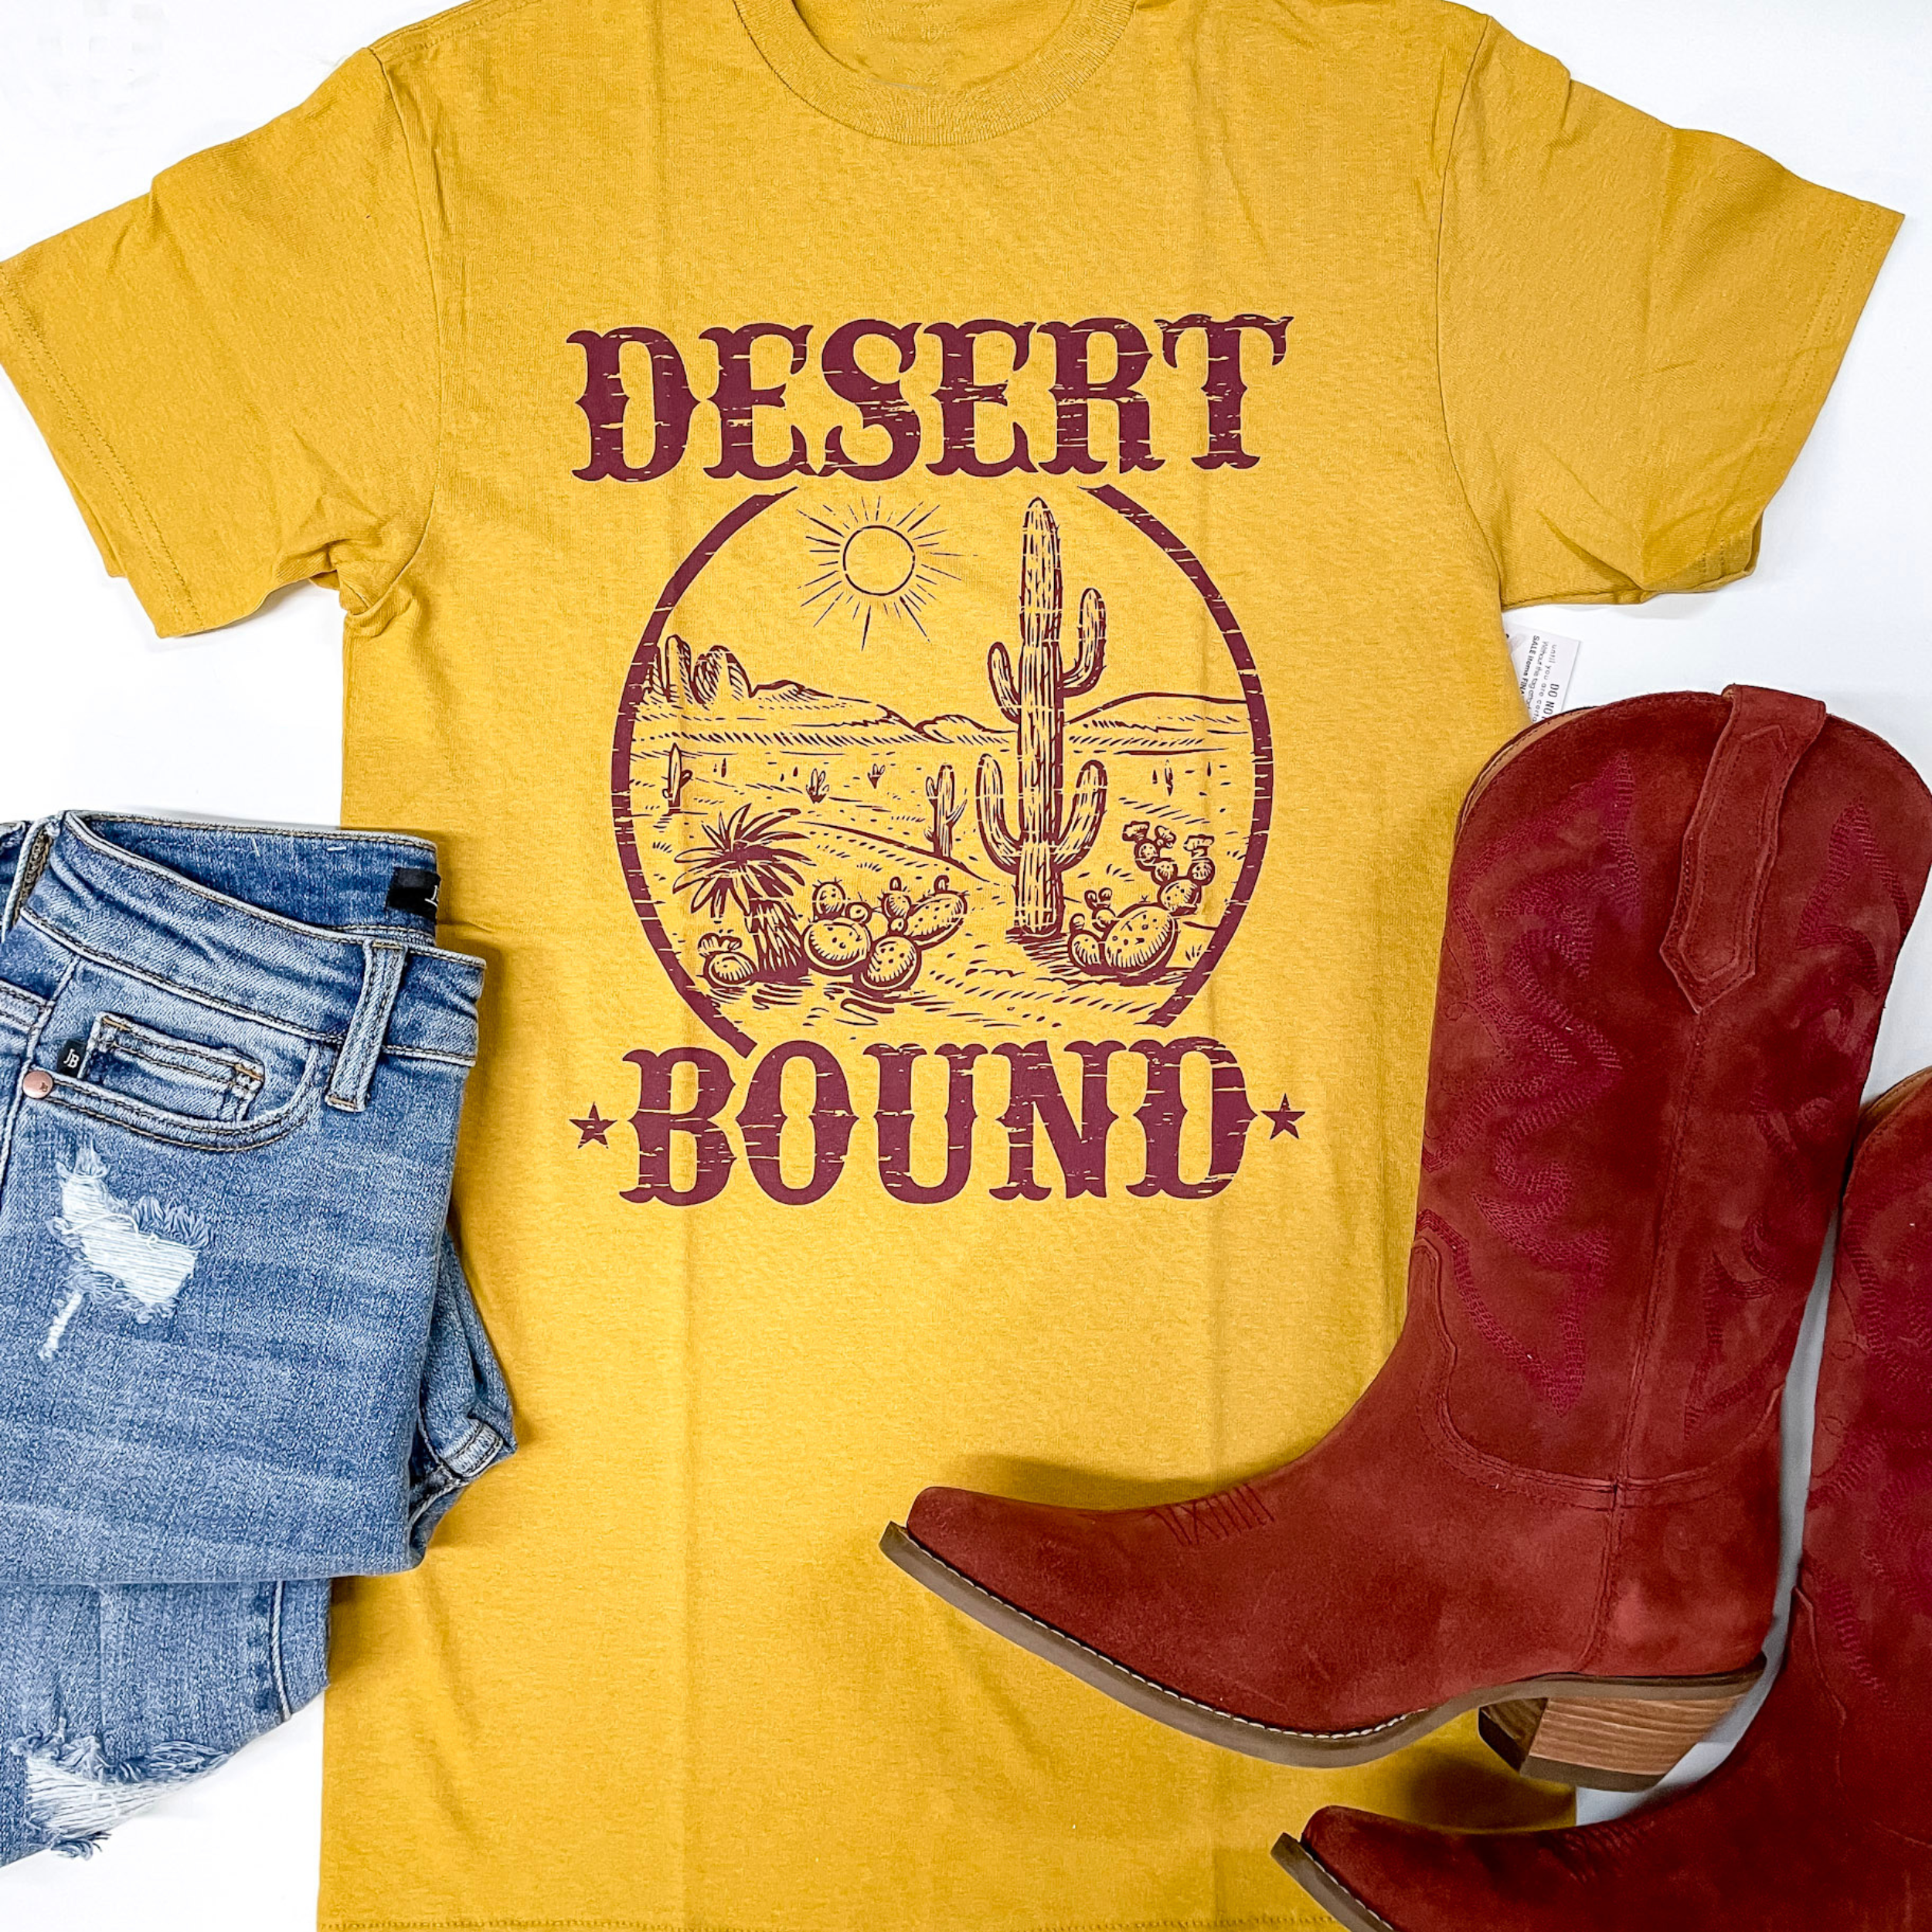 A mustard yellow tee is laid center on a white background. In the center of the tee is a graphic design of a desert with the words, "desert bound." On the bottom left corner is a light-wash pair of jeans and on the bottom right there is a red pair of boots. 